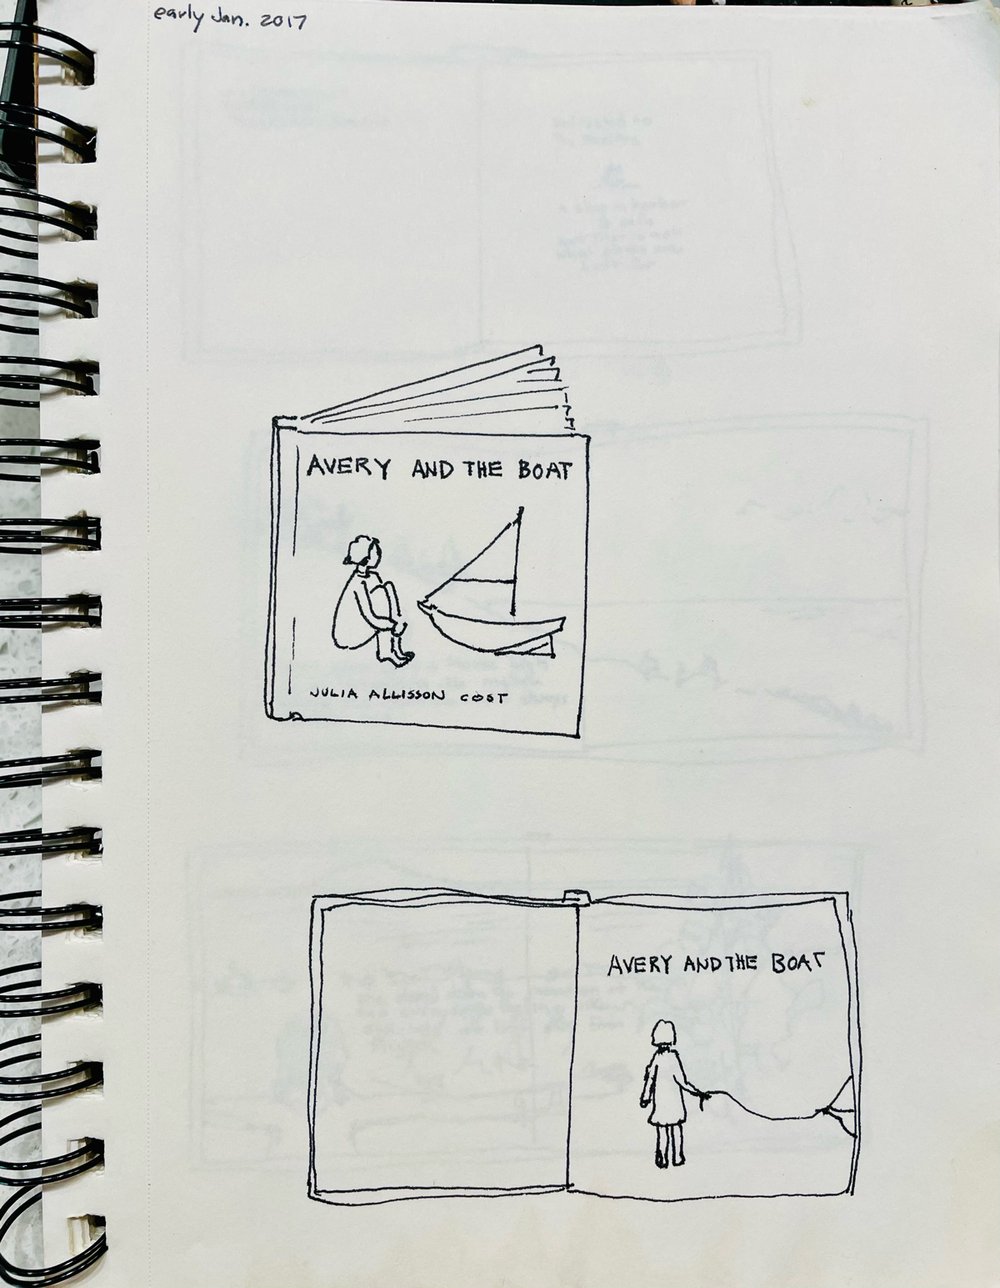 storyboard-of-little-girl-and-the-boat-cover-2017-journal.jpg